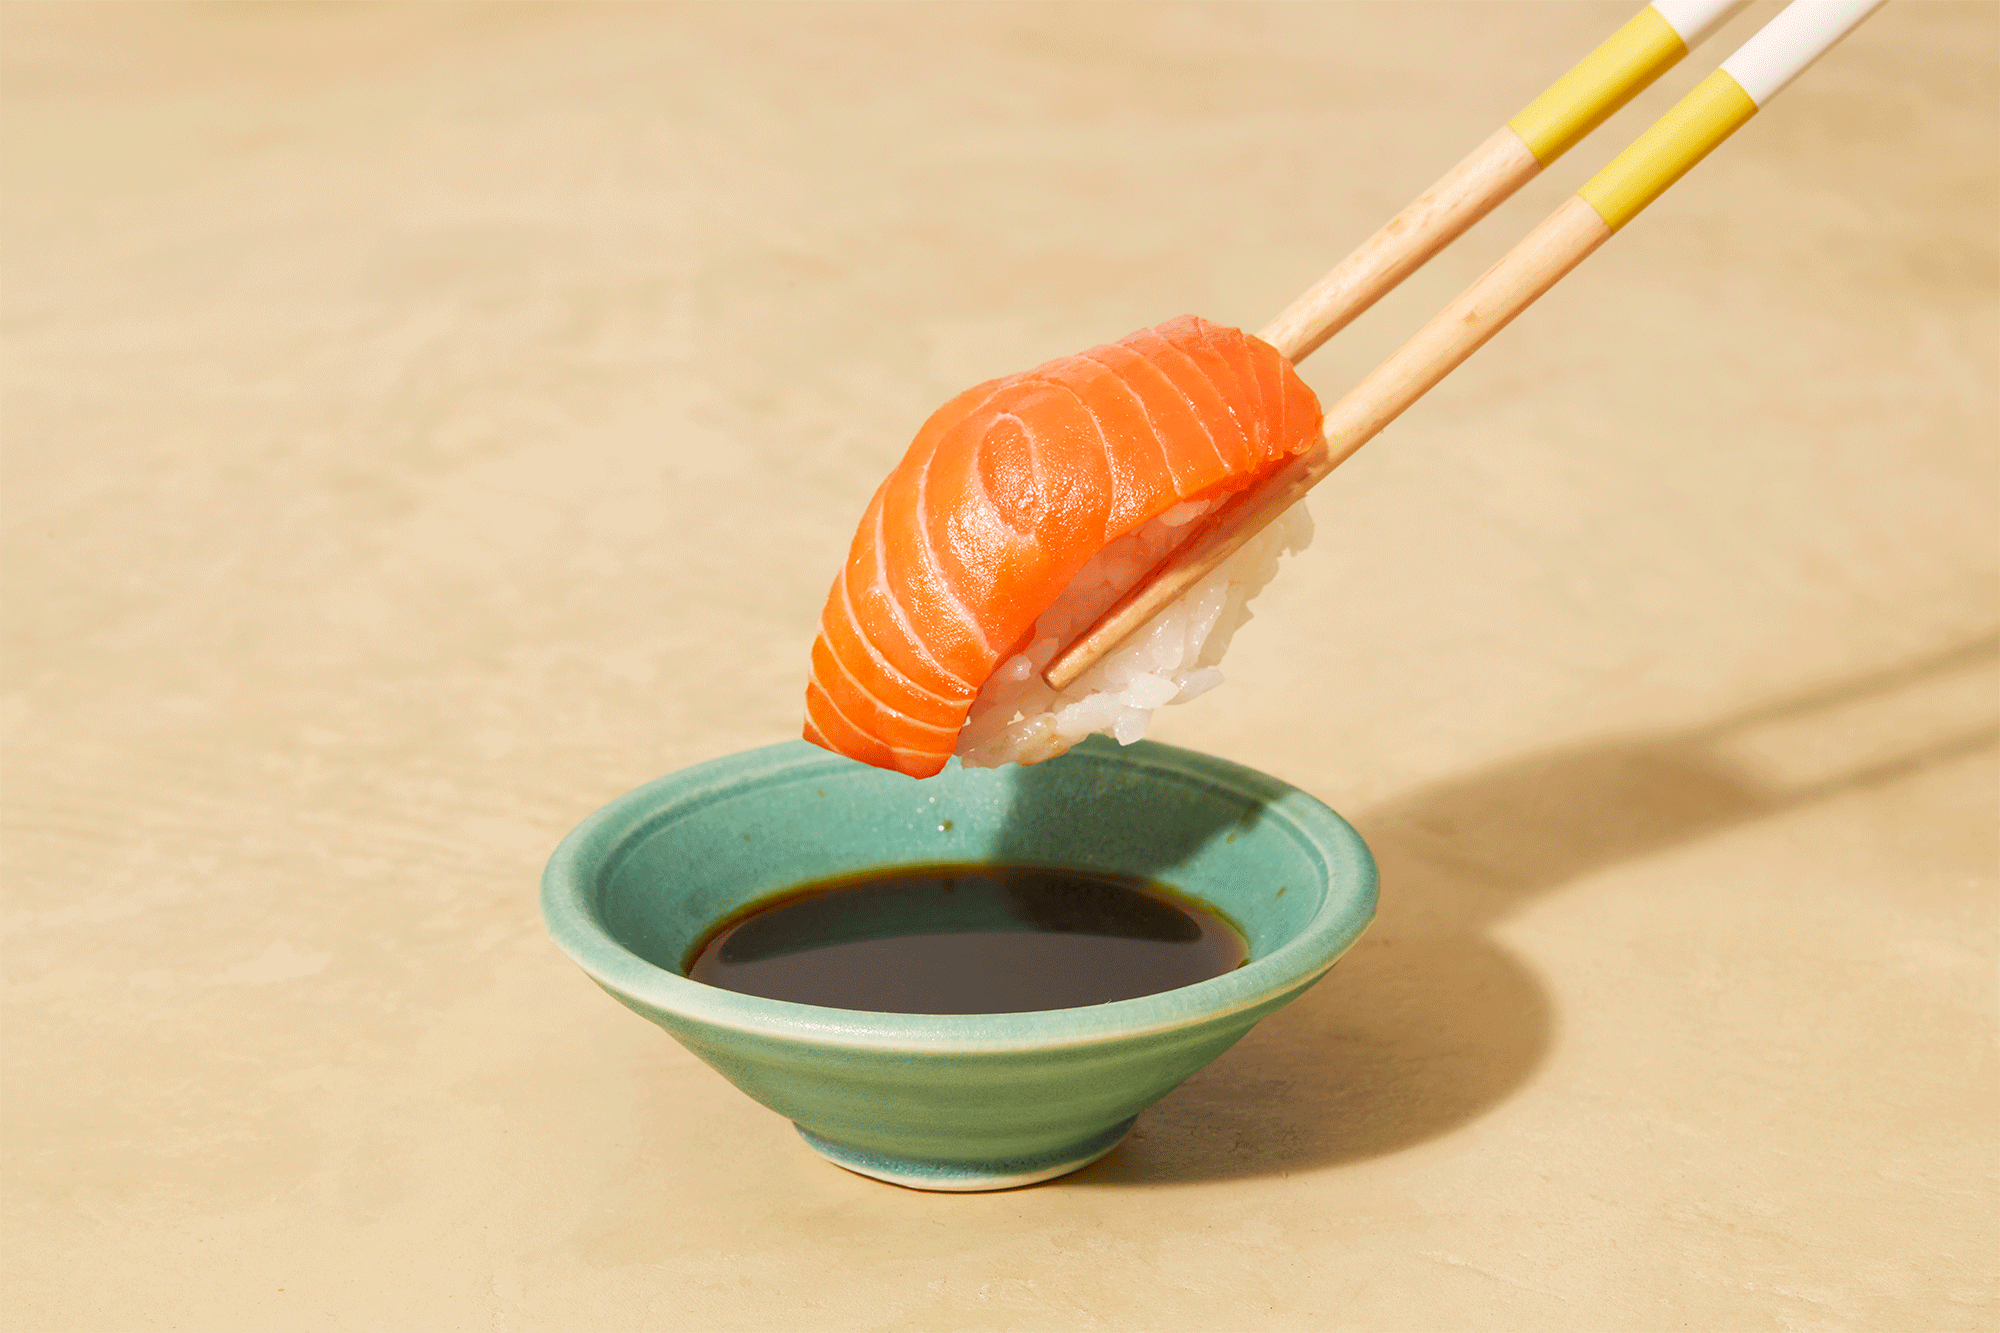 Instacart_EatNow_Sushi_Dunk_A0894_stop_motion-v2_no_ause